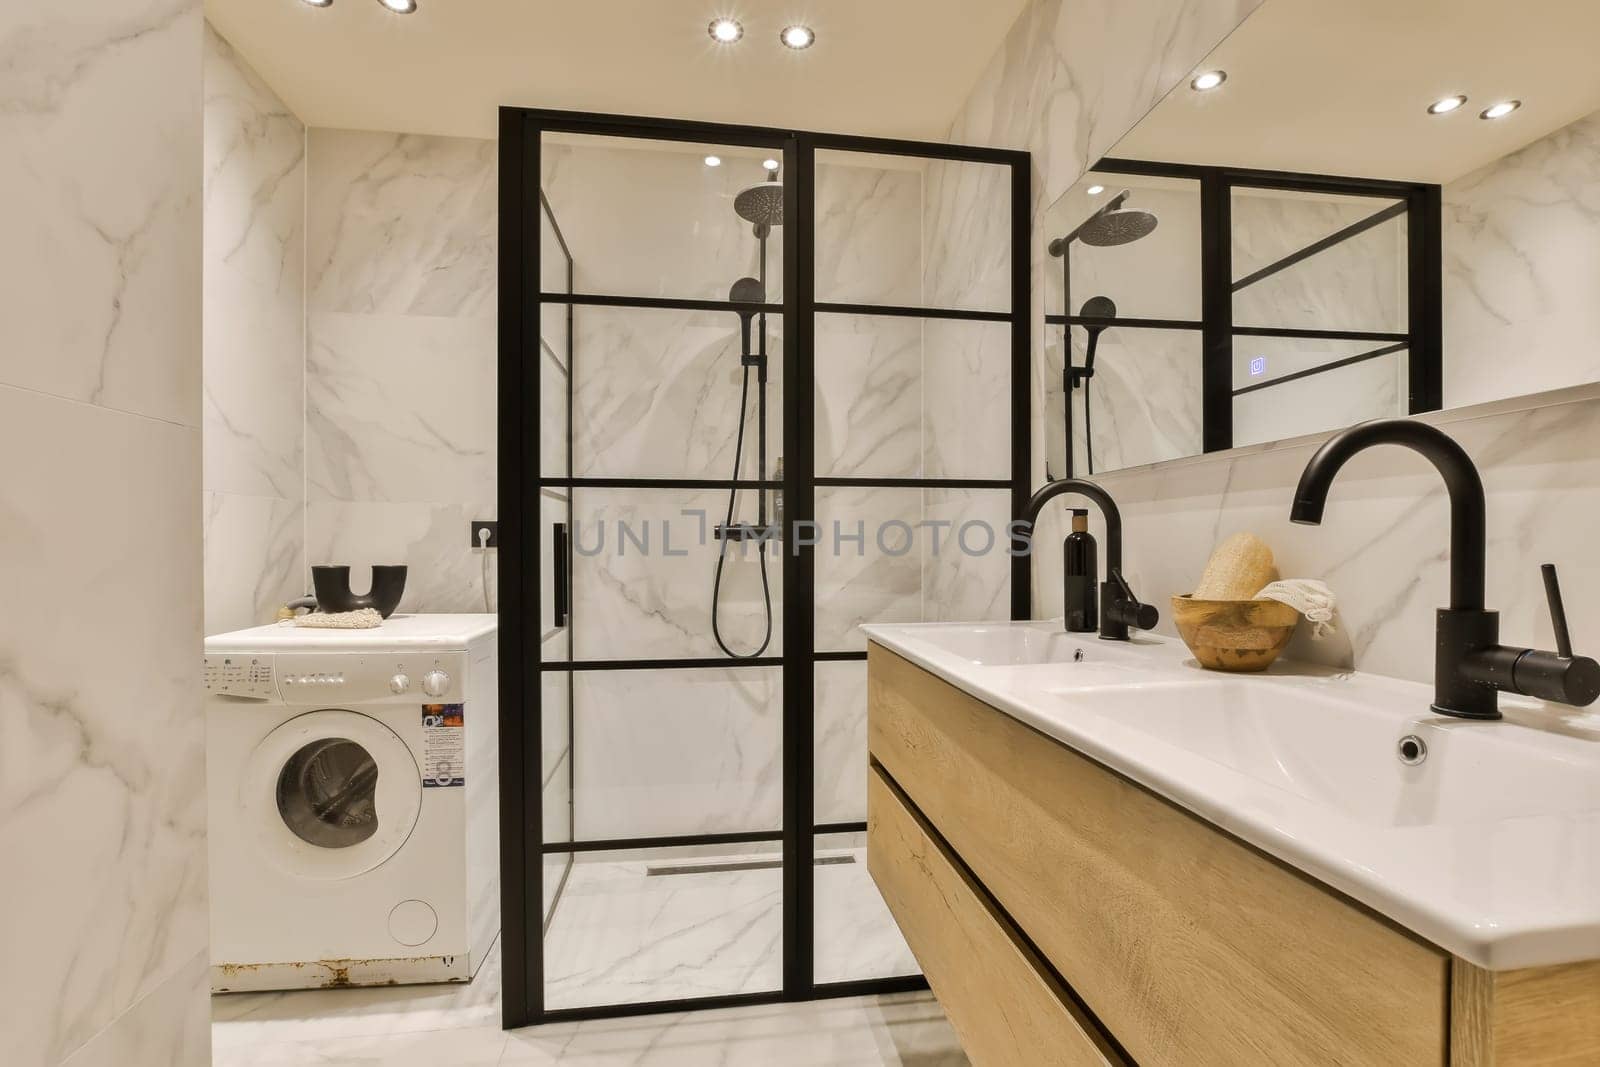 a modern bathroom with white marble walls and black framed mirrors on the wall, there is a washer in the corner